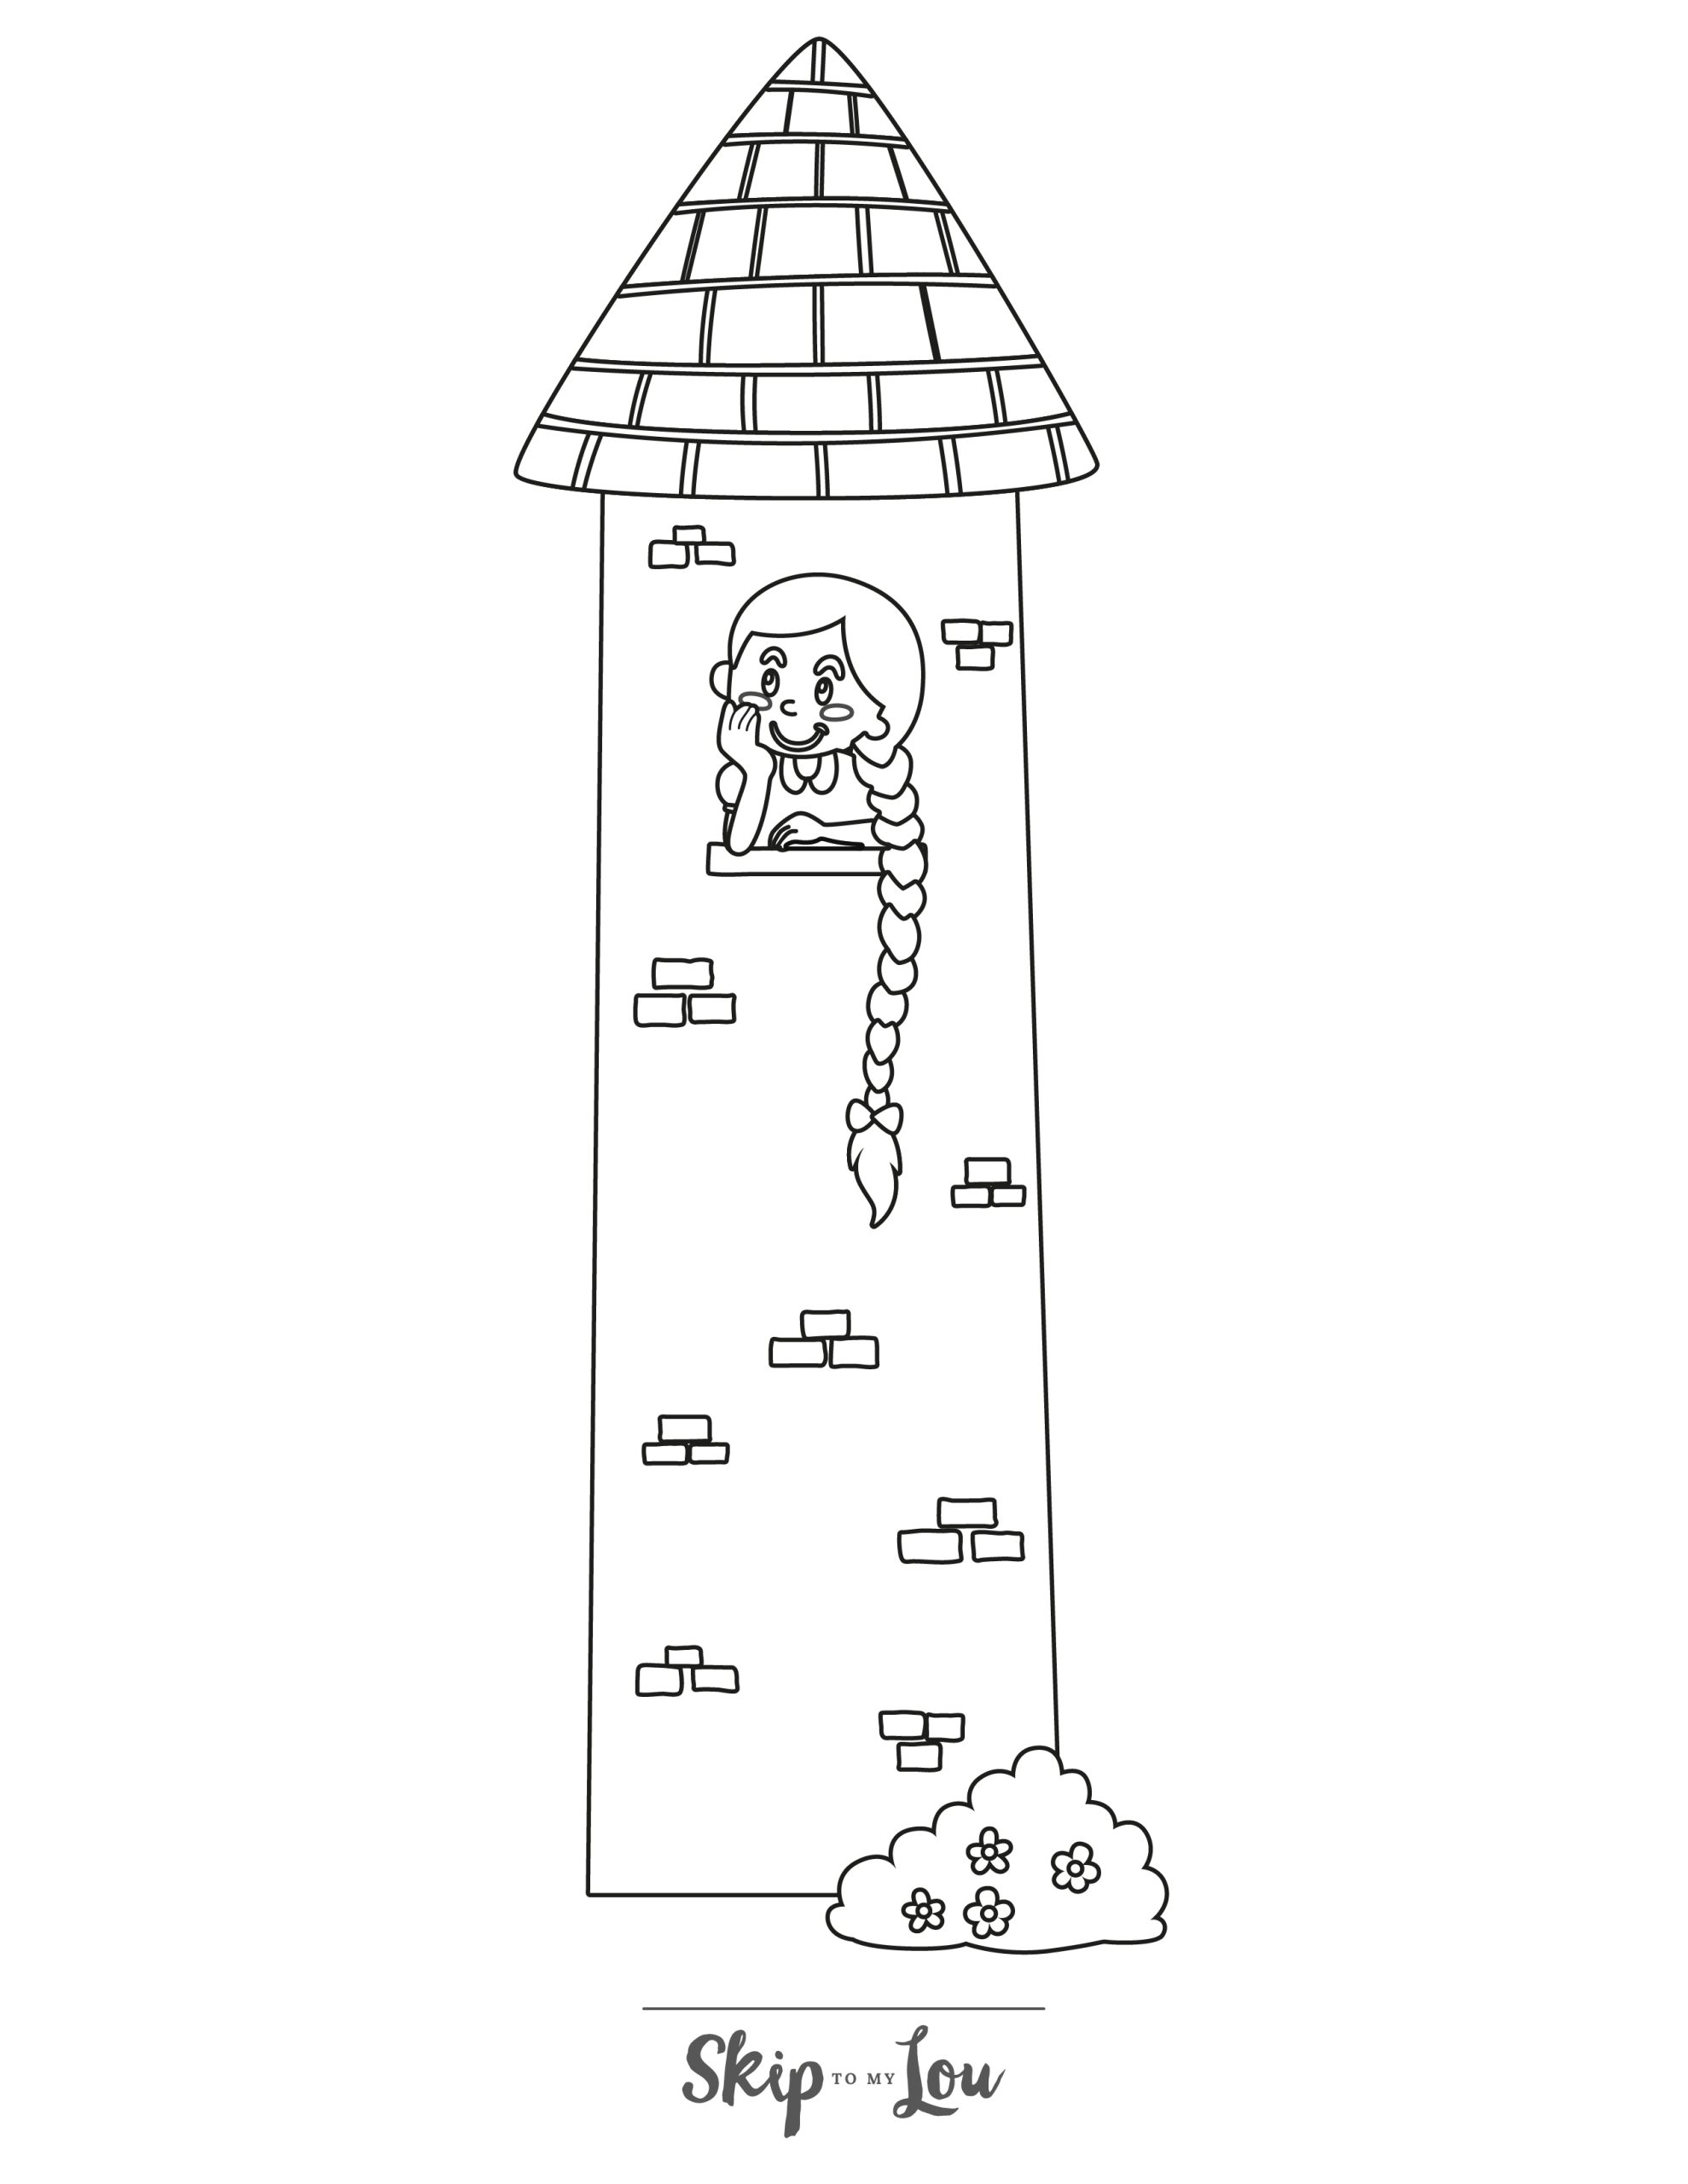 Rapunzel Coloring Page 2 - Line drawing of Rapunzel in the tower